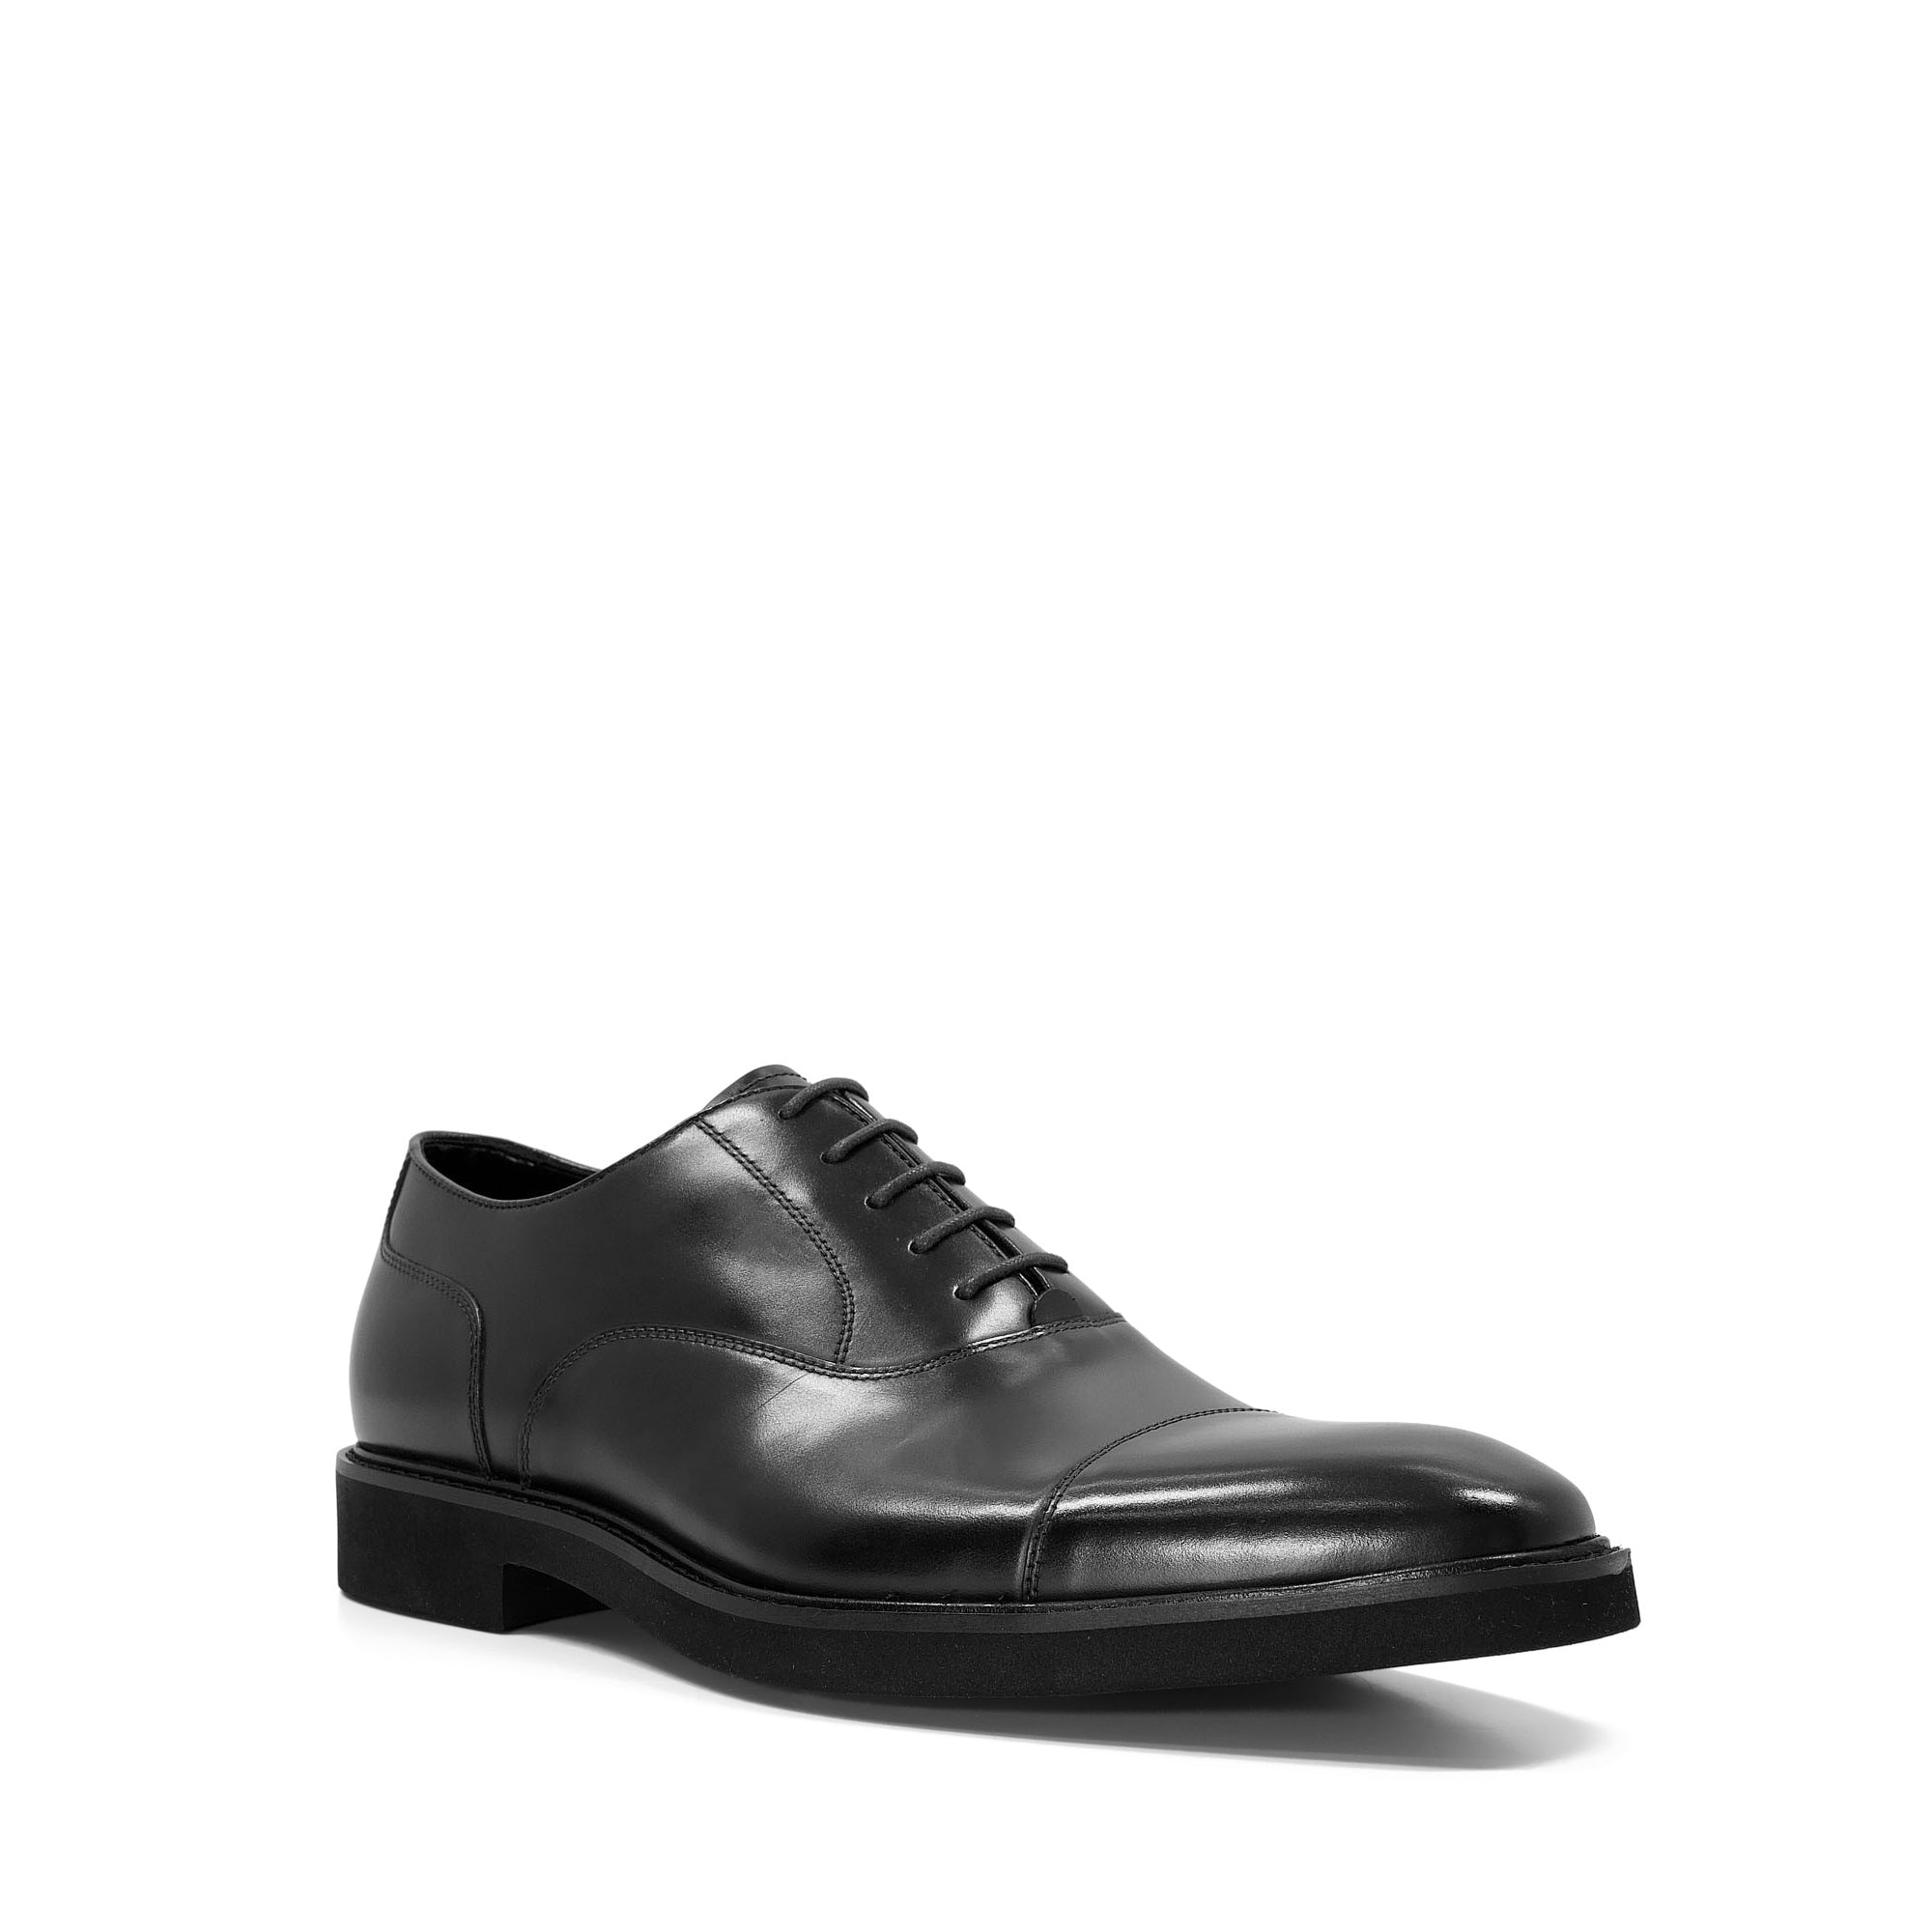 SHILOH - Leather Lace-Up Oxford Shoes